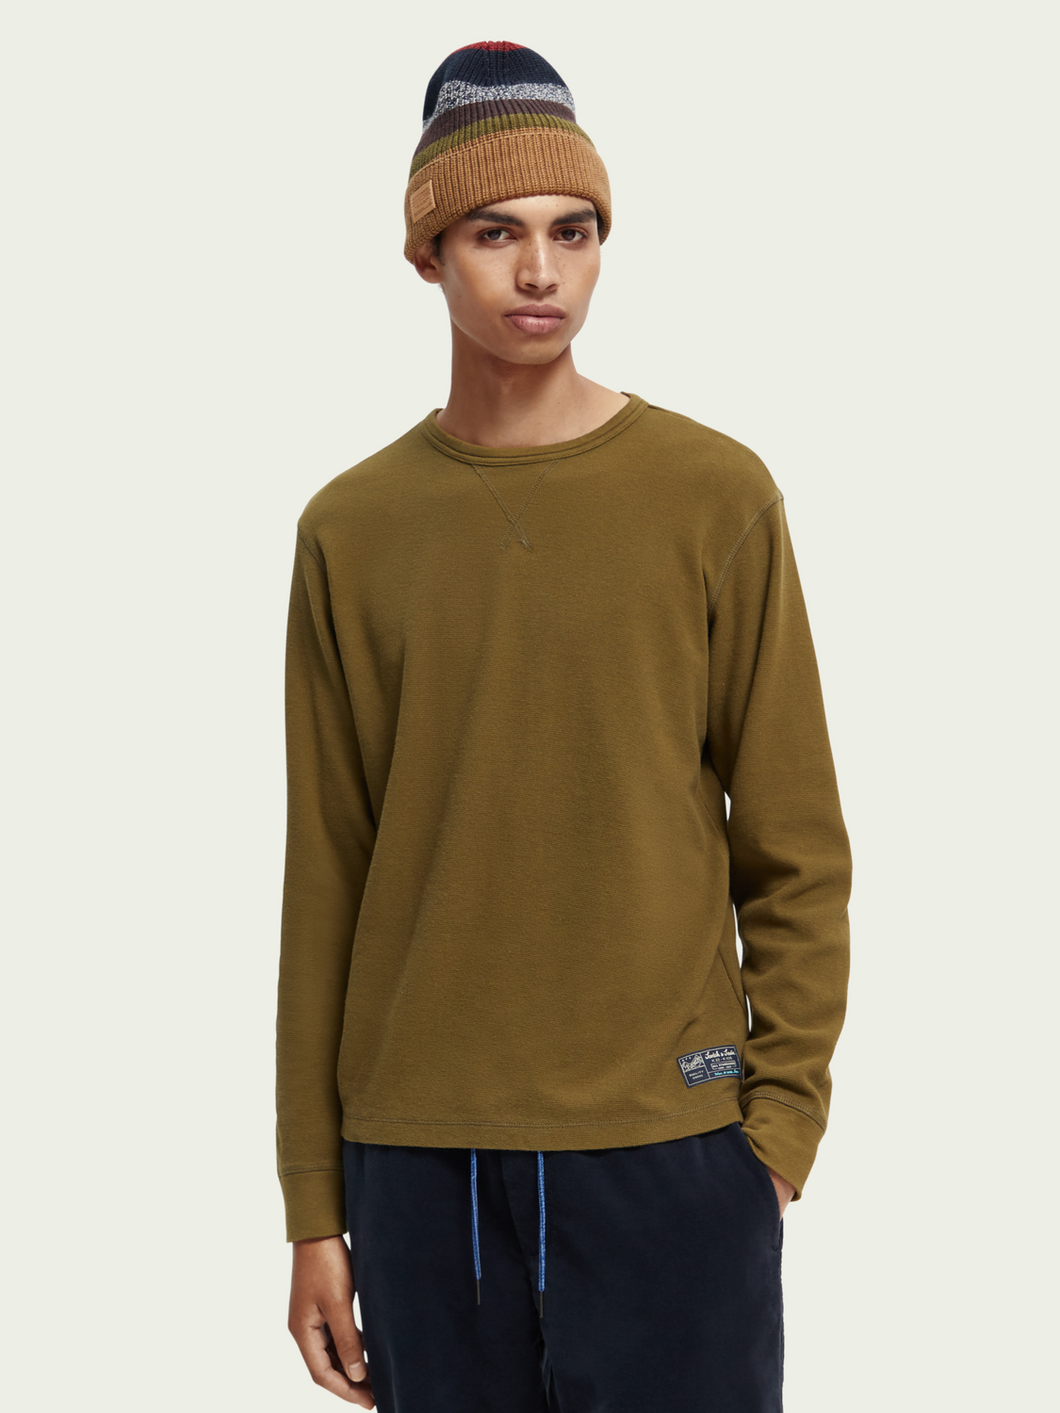 Scotch & Soda Mens Structured Waffle L/S Tee in Military - FINAL SALE